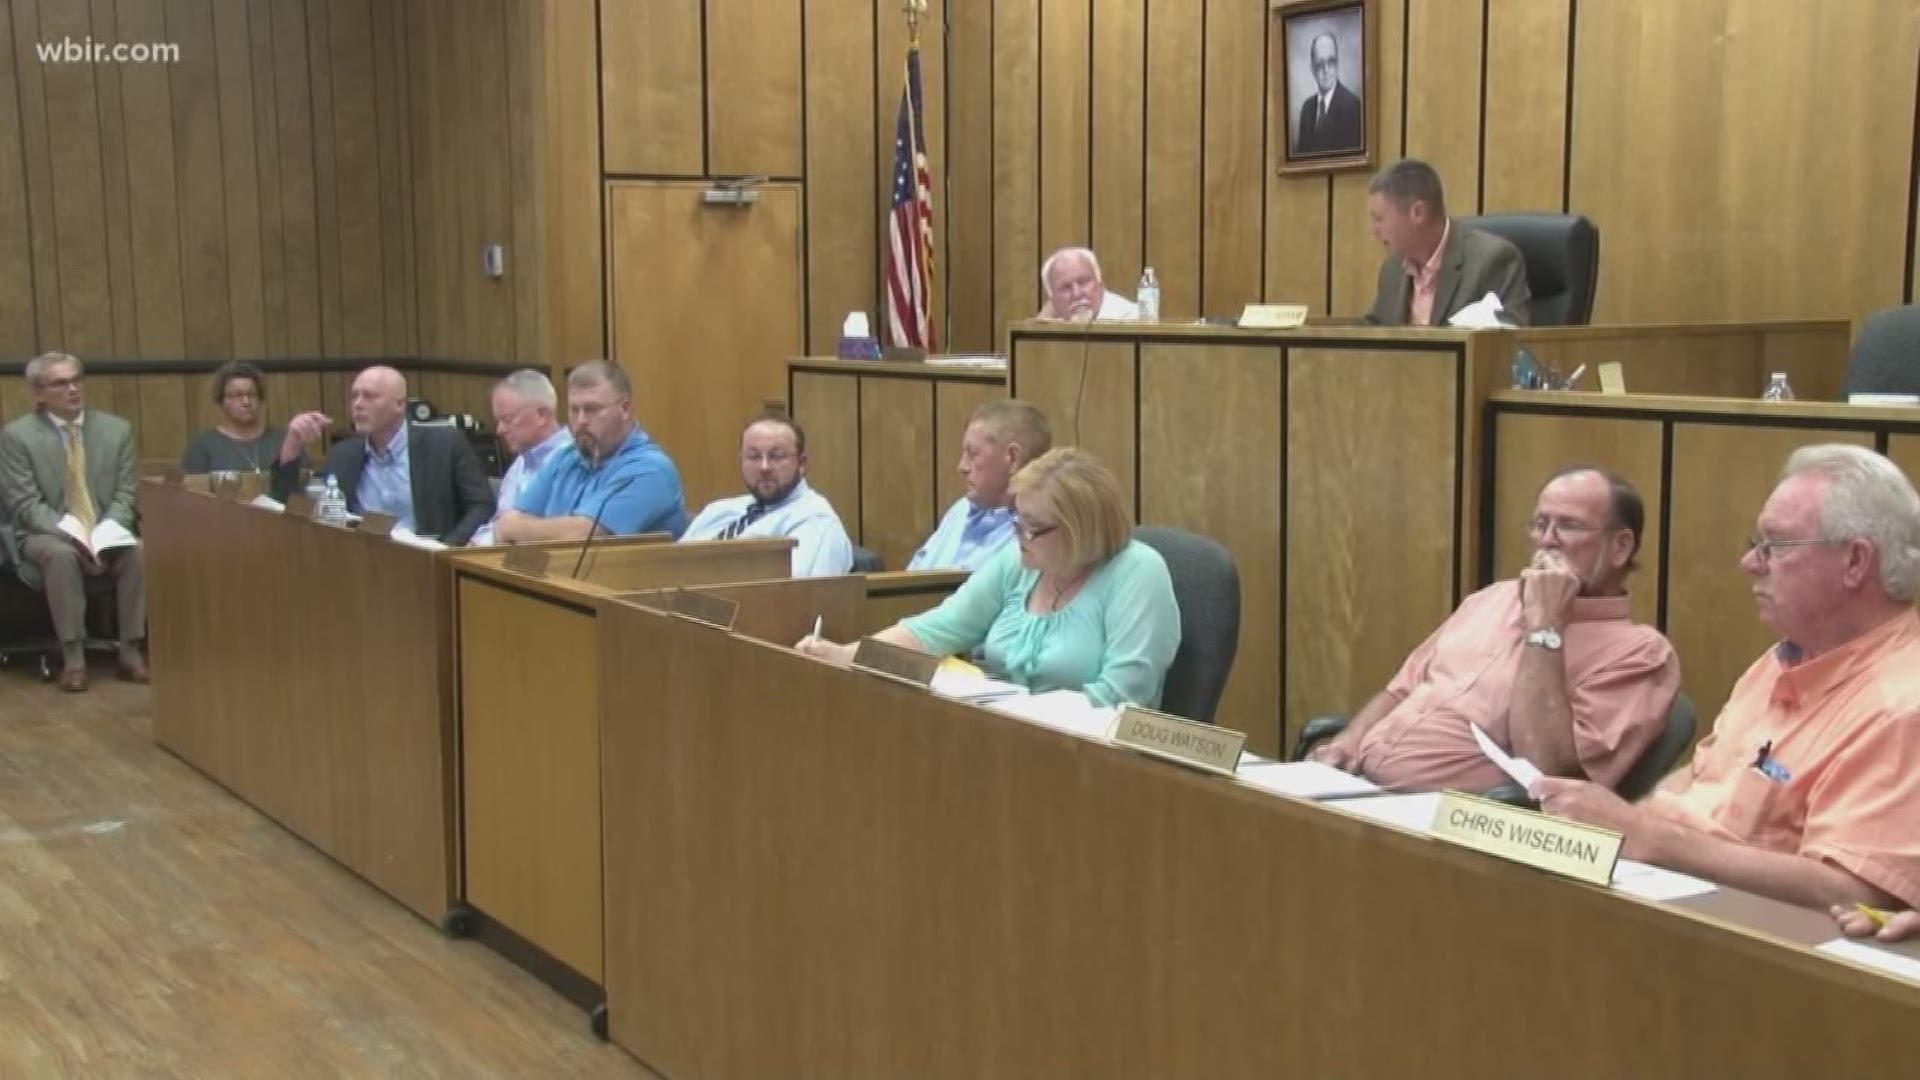 The Monroe County Commission voted in favor of raising the county's wheel tax.